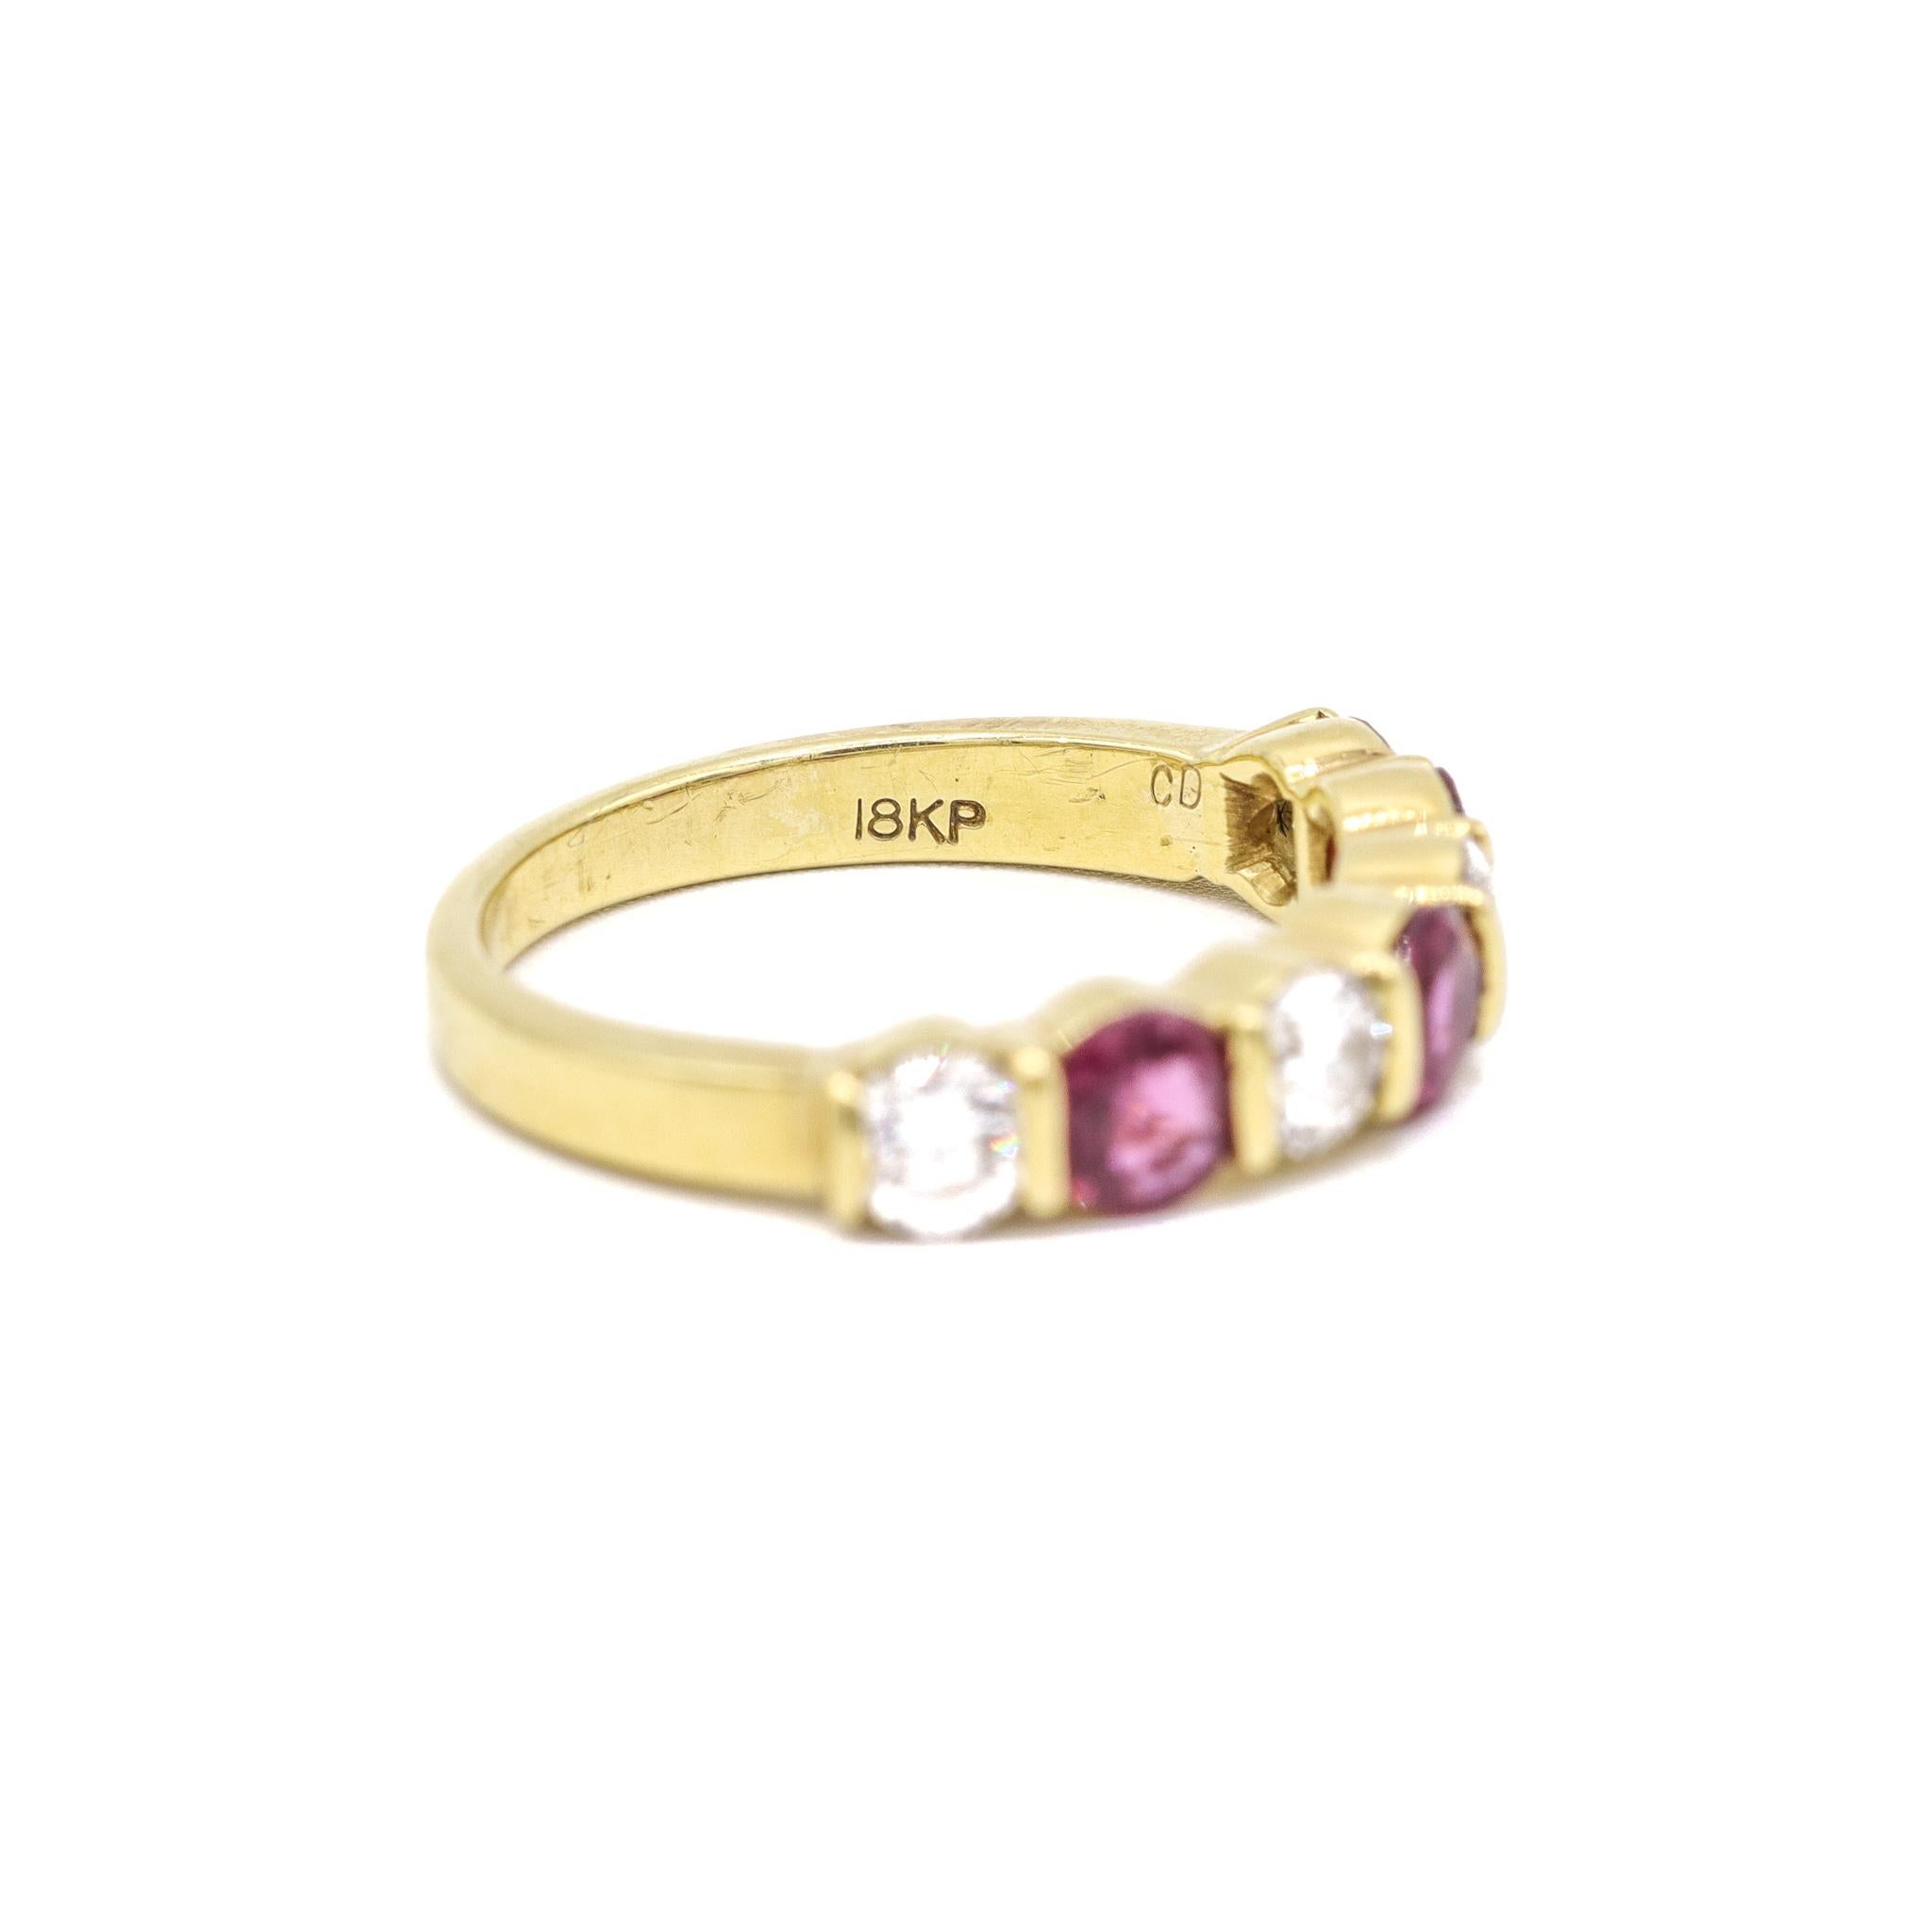 One lady's custom made polished 18K yellow gold seven-across, diamond and ruby vintage, semi-eternity band with a soft-square shank. The band is a size 6.5. The band weighs a total of 4.00 grams. Stamped 